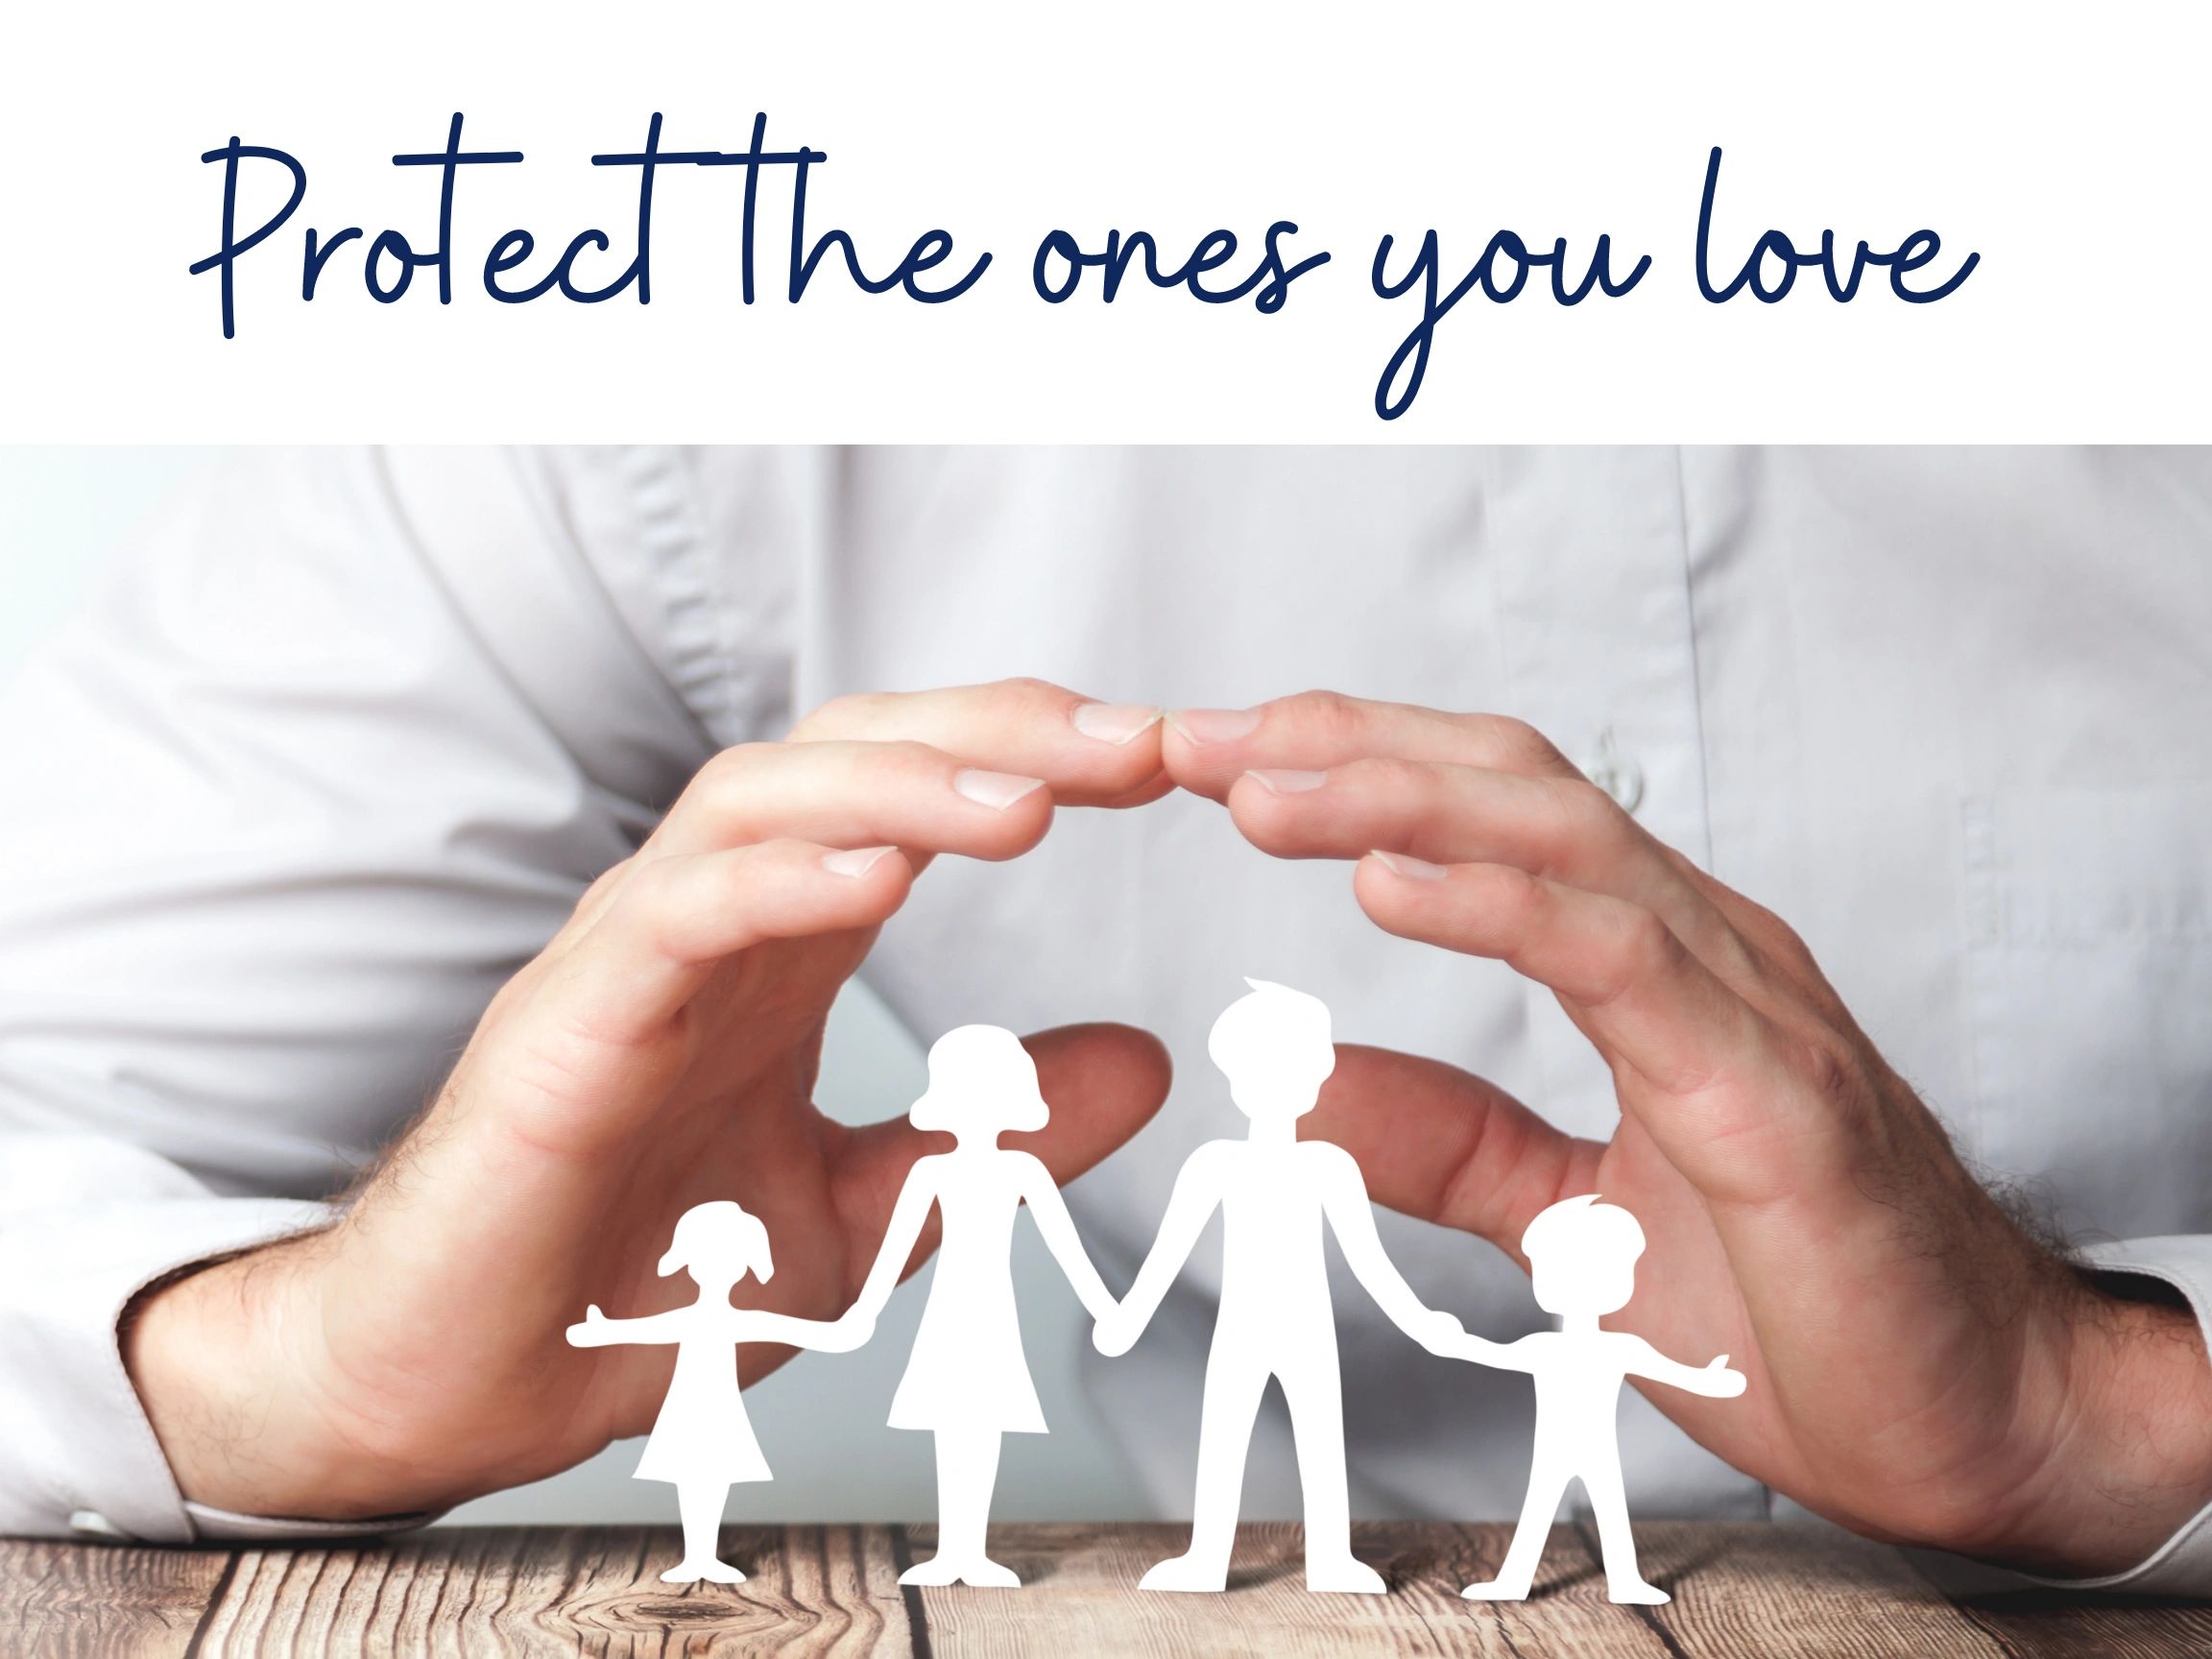 Life Insurance Plans protect the ones you love in a affordable way